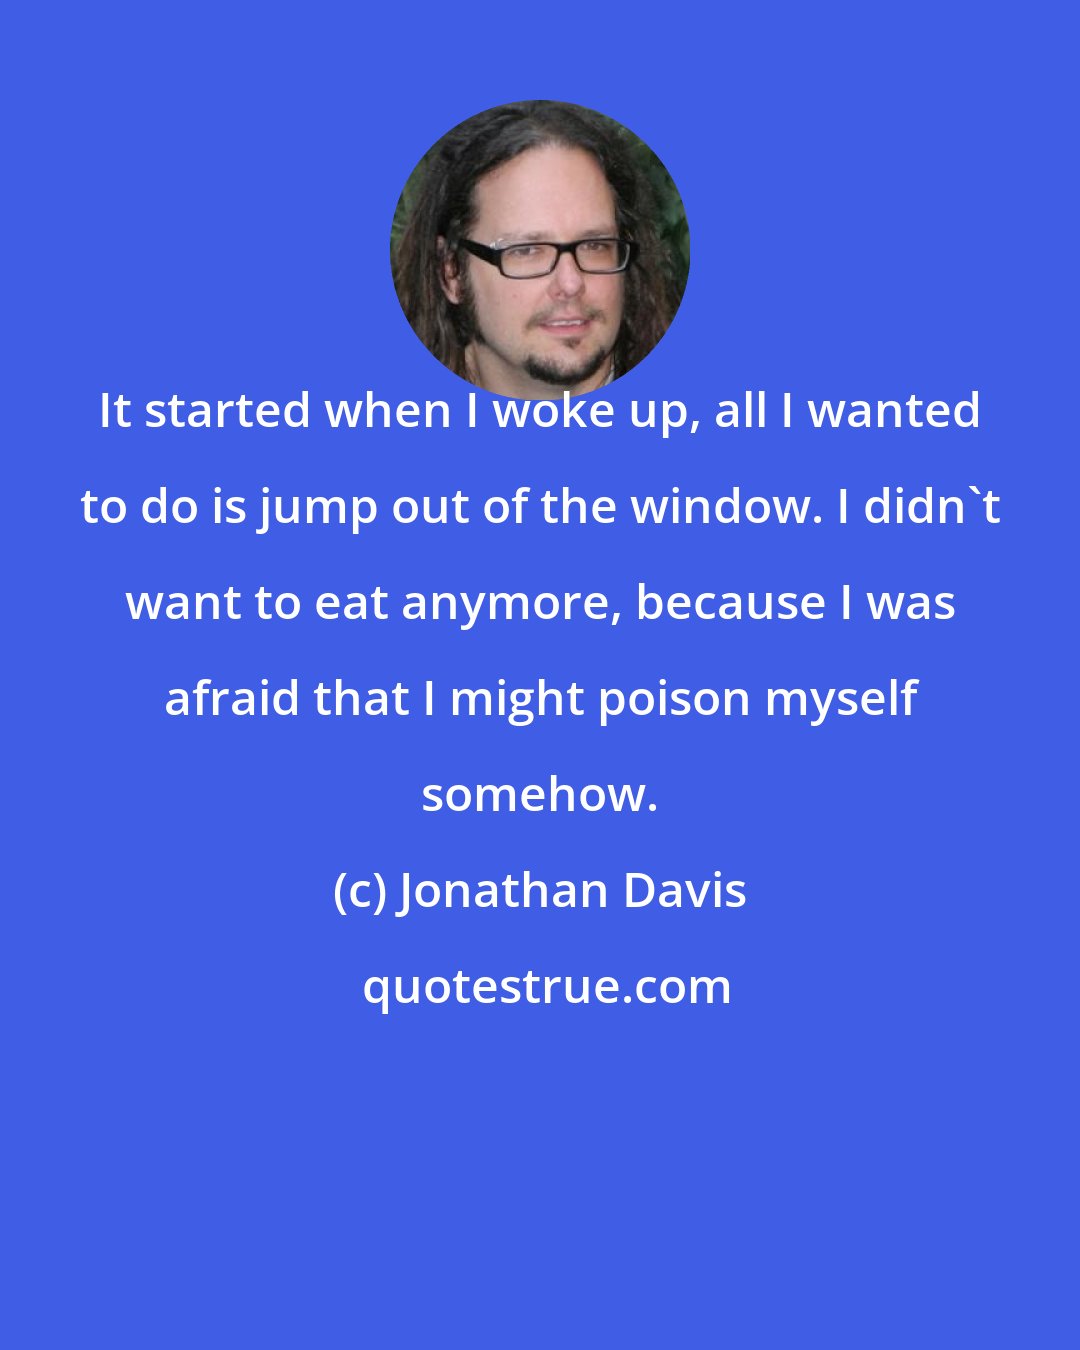 Jonathan Davis: It started when I woke up, all I wanted to do is jump out of the window. I didn't want to eat anymore, because I was afraid that I might poison myself somehow.